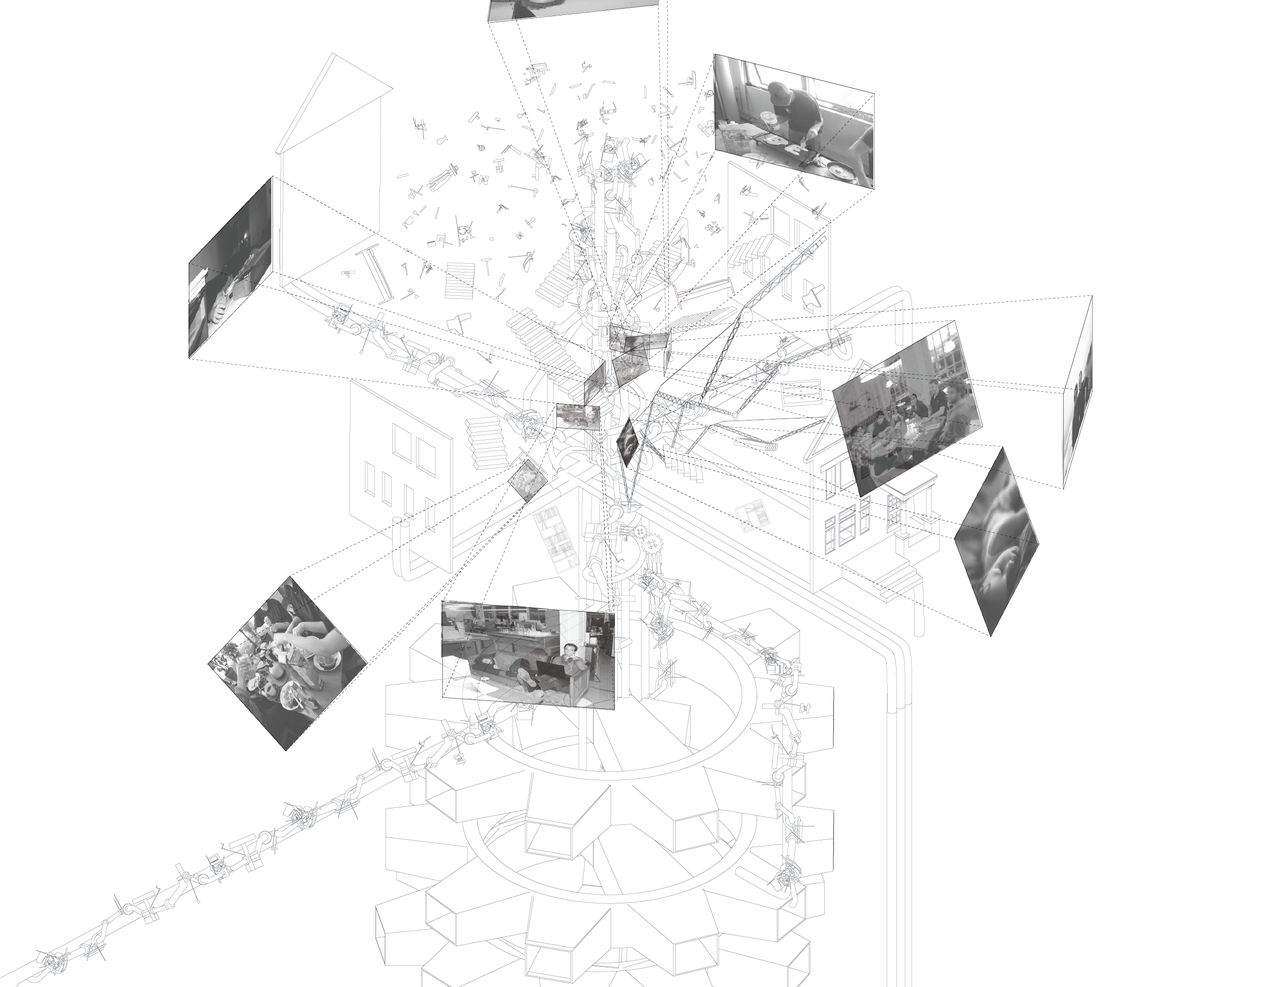 An abstract architectural drawing showing photographs exploding outwards from a room